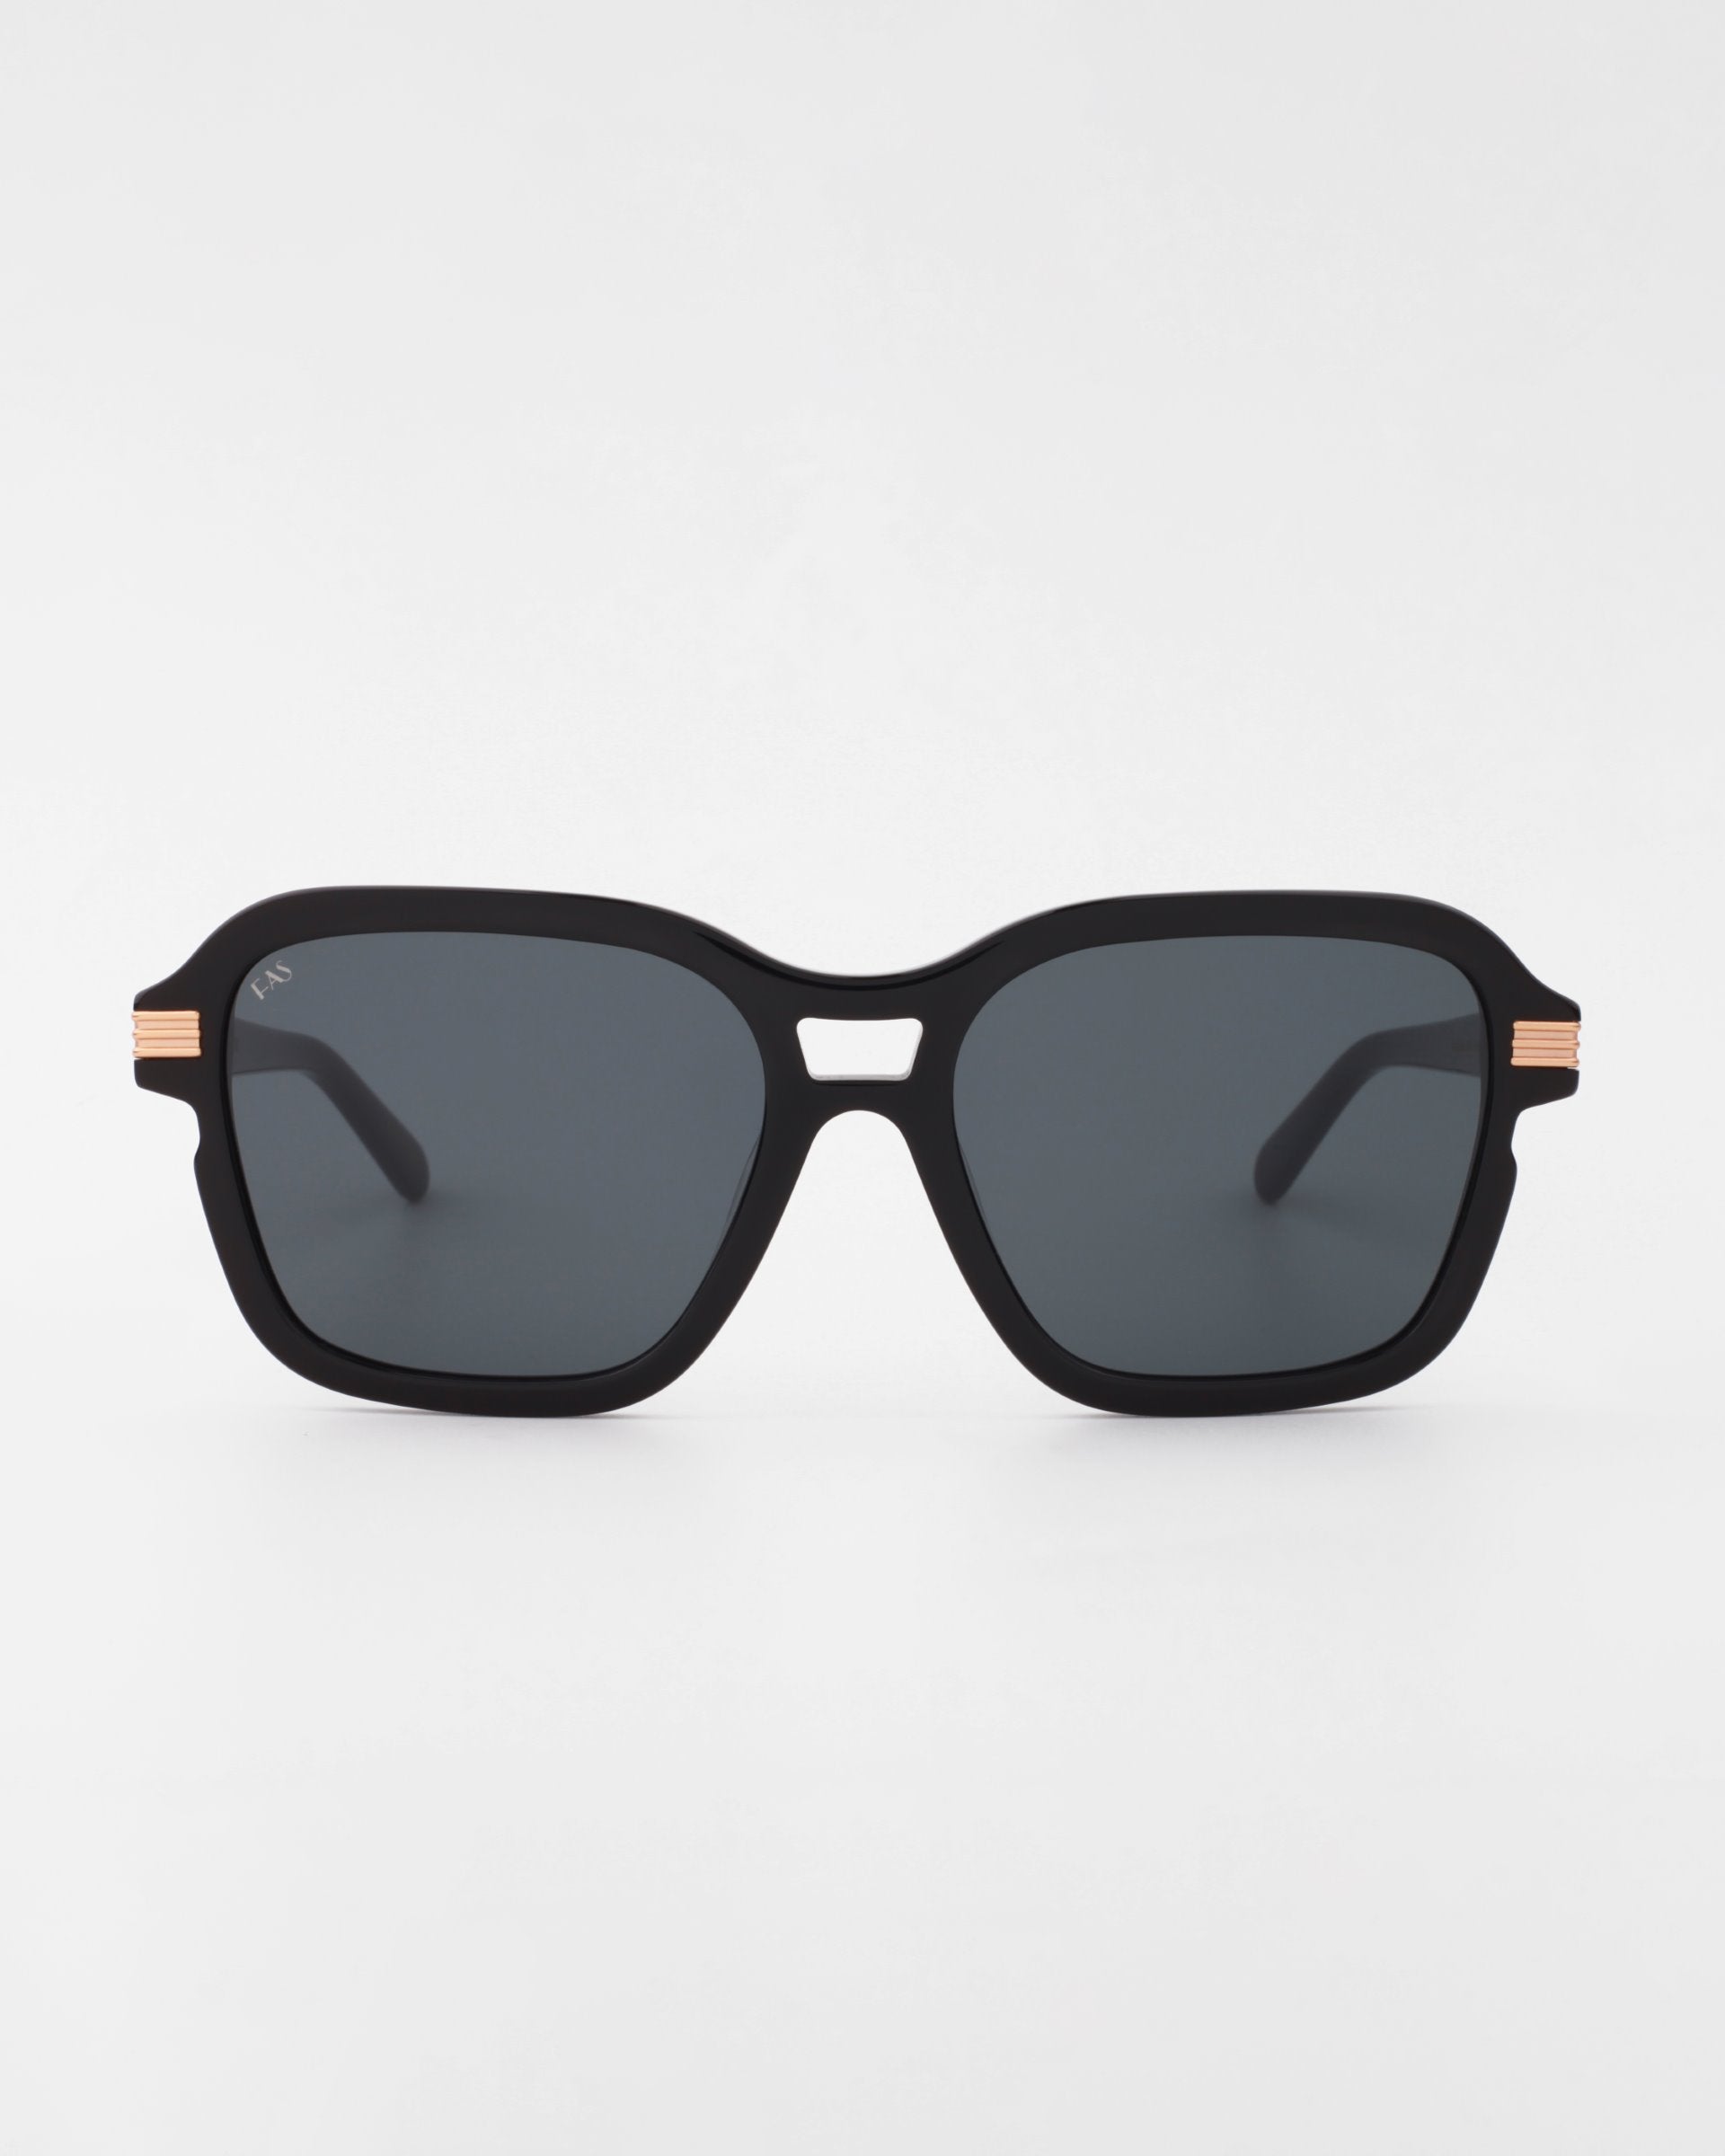 A pair of stylish black square-frame Shadyside sunglasses by For Art&#39;s Sake® with shatter-resistant nylon lenses. The hand-polished acetate temples are decorated with thin horizontal metallic accents near the hinge area. The background is plain white.